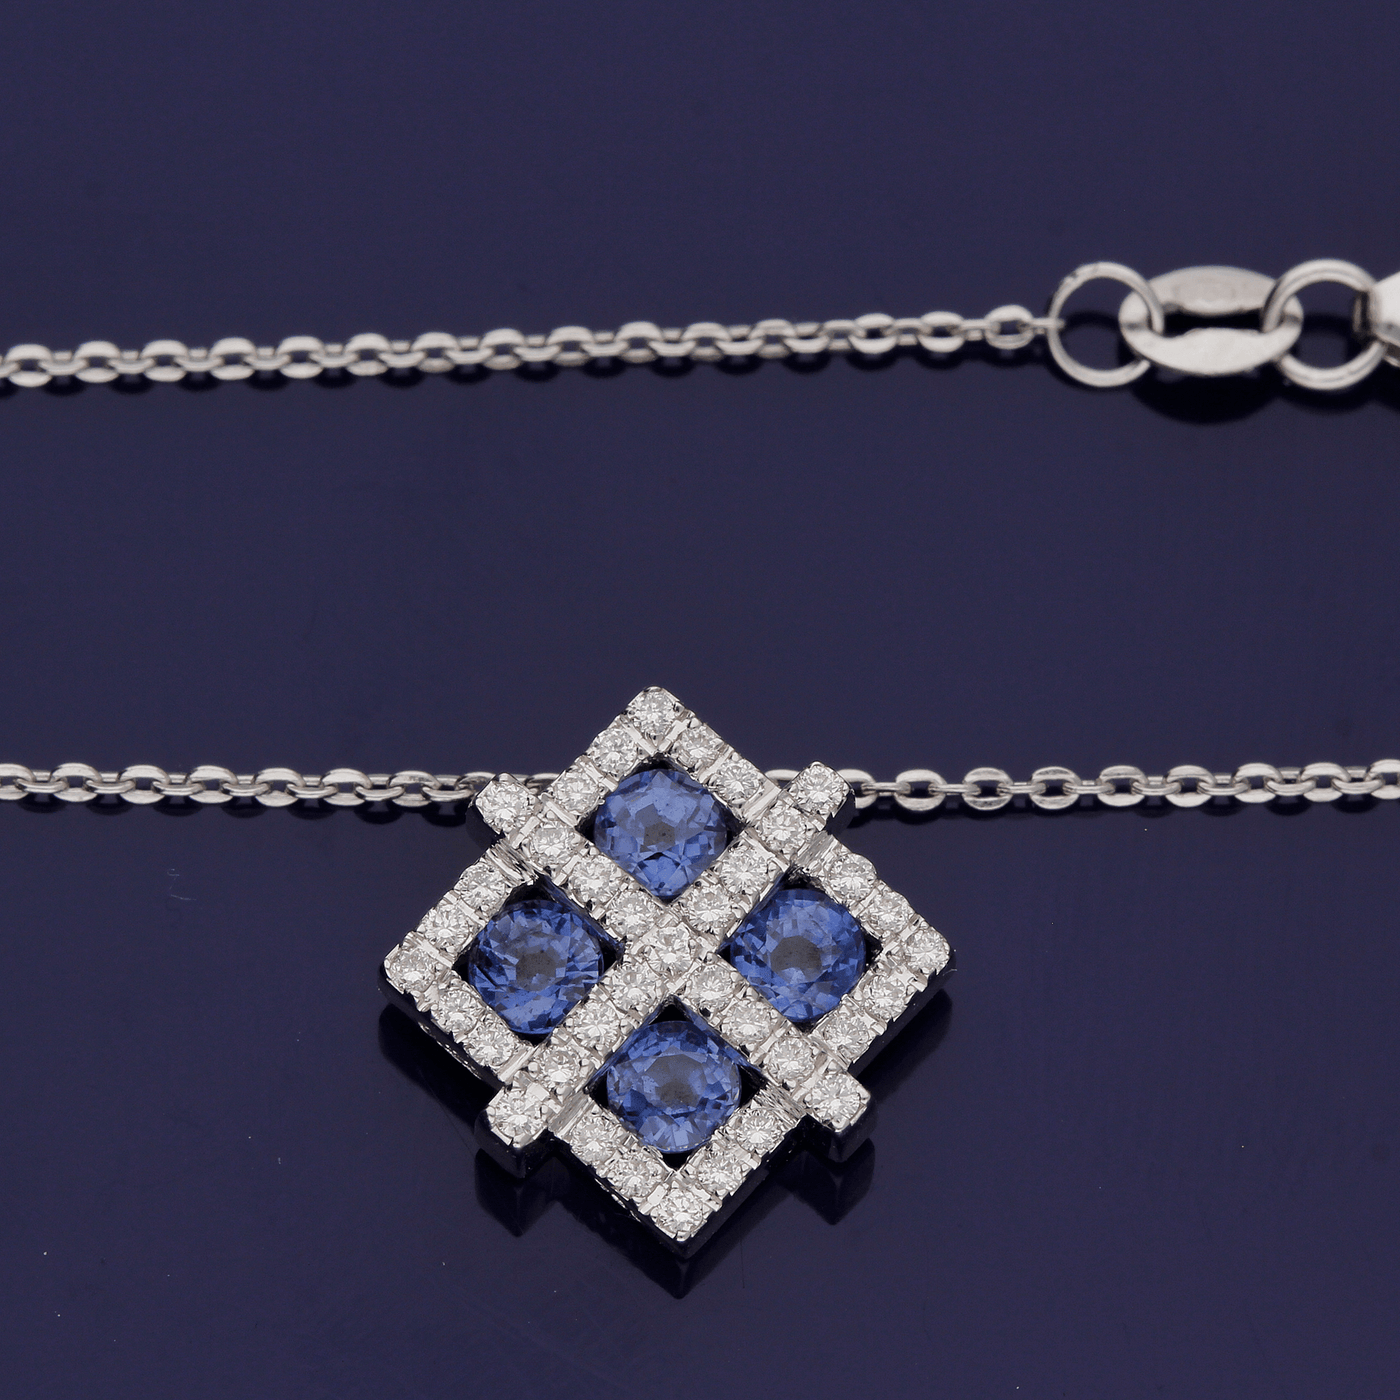 18ct White Gold Sapphire and Diamond Necklace - GoldArts